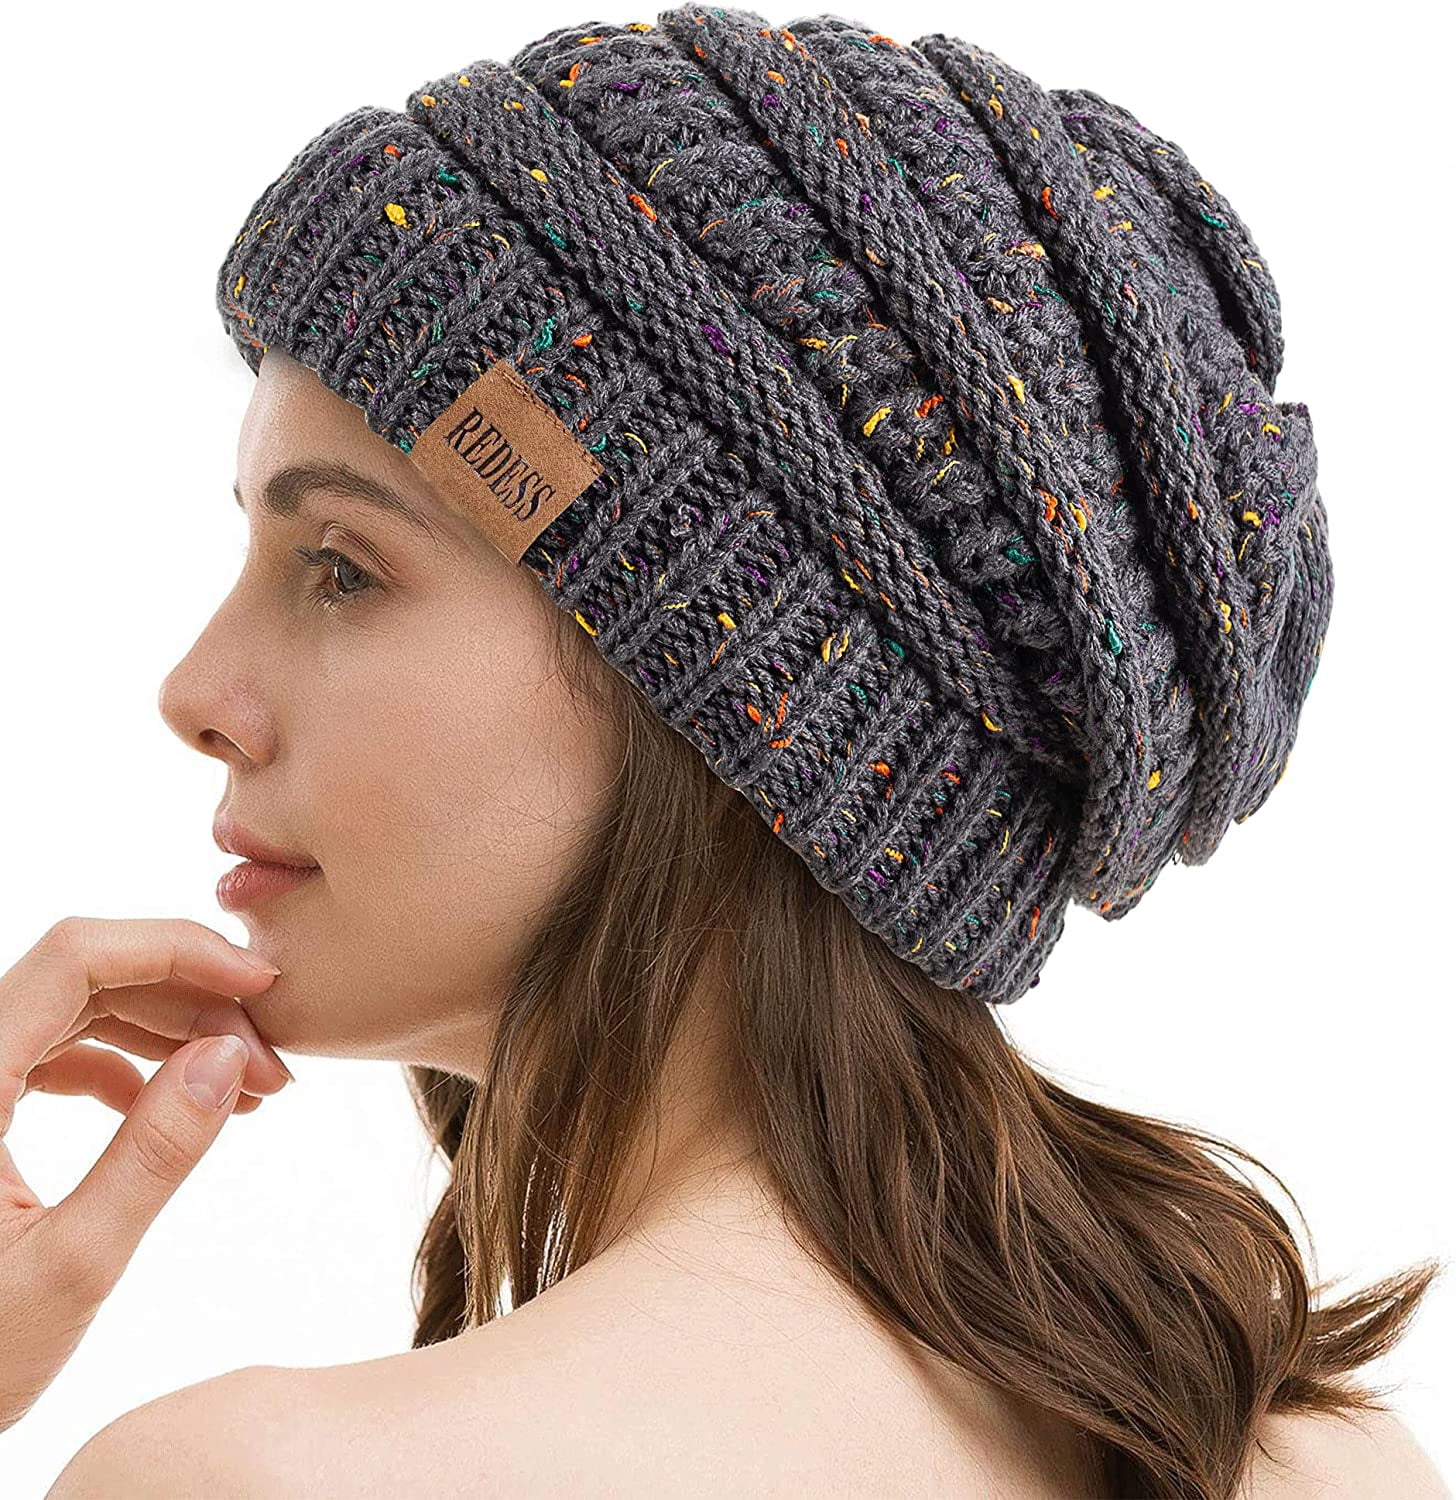 Slouchy Beanie Hat for Women Winter Warm Chunky Soft Oversized Cable ...